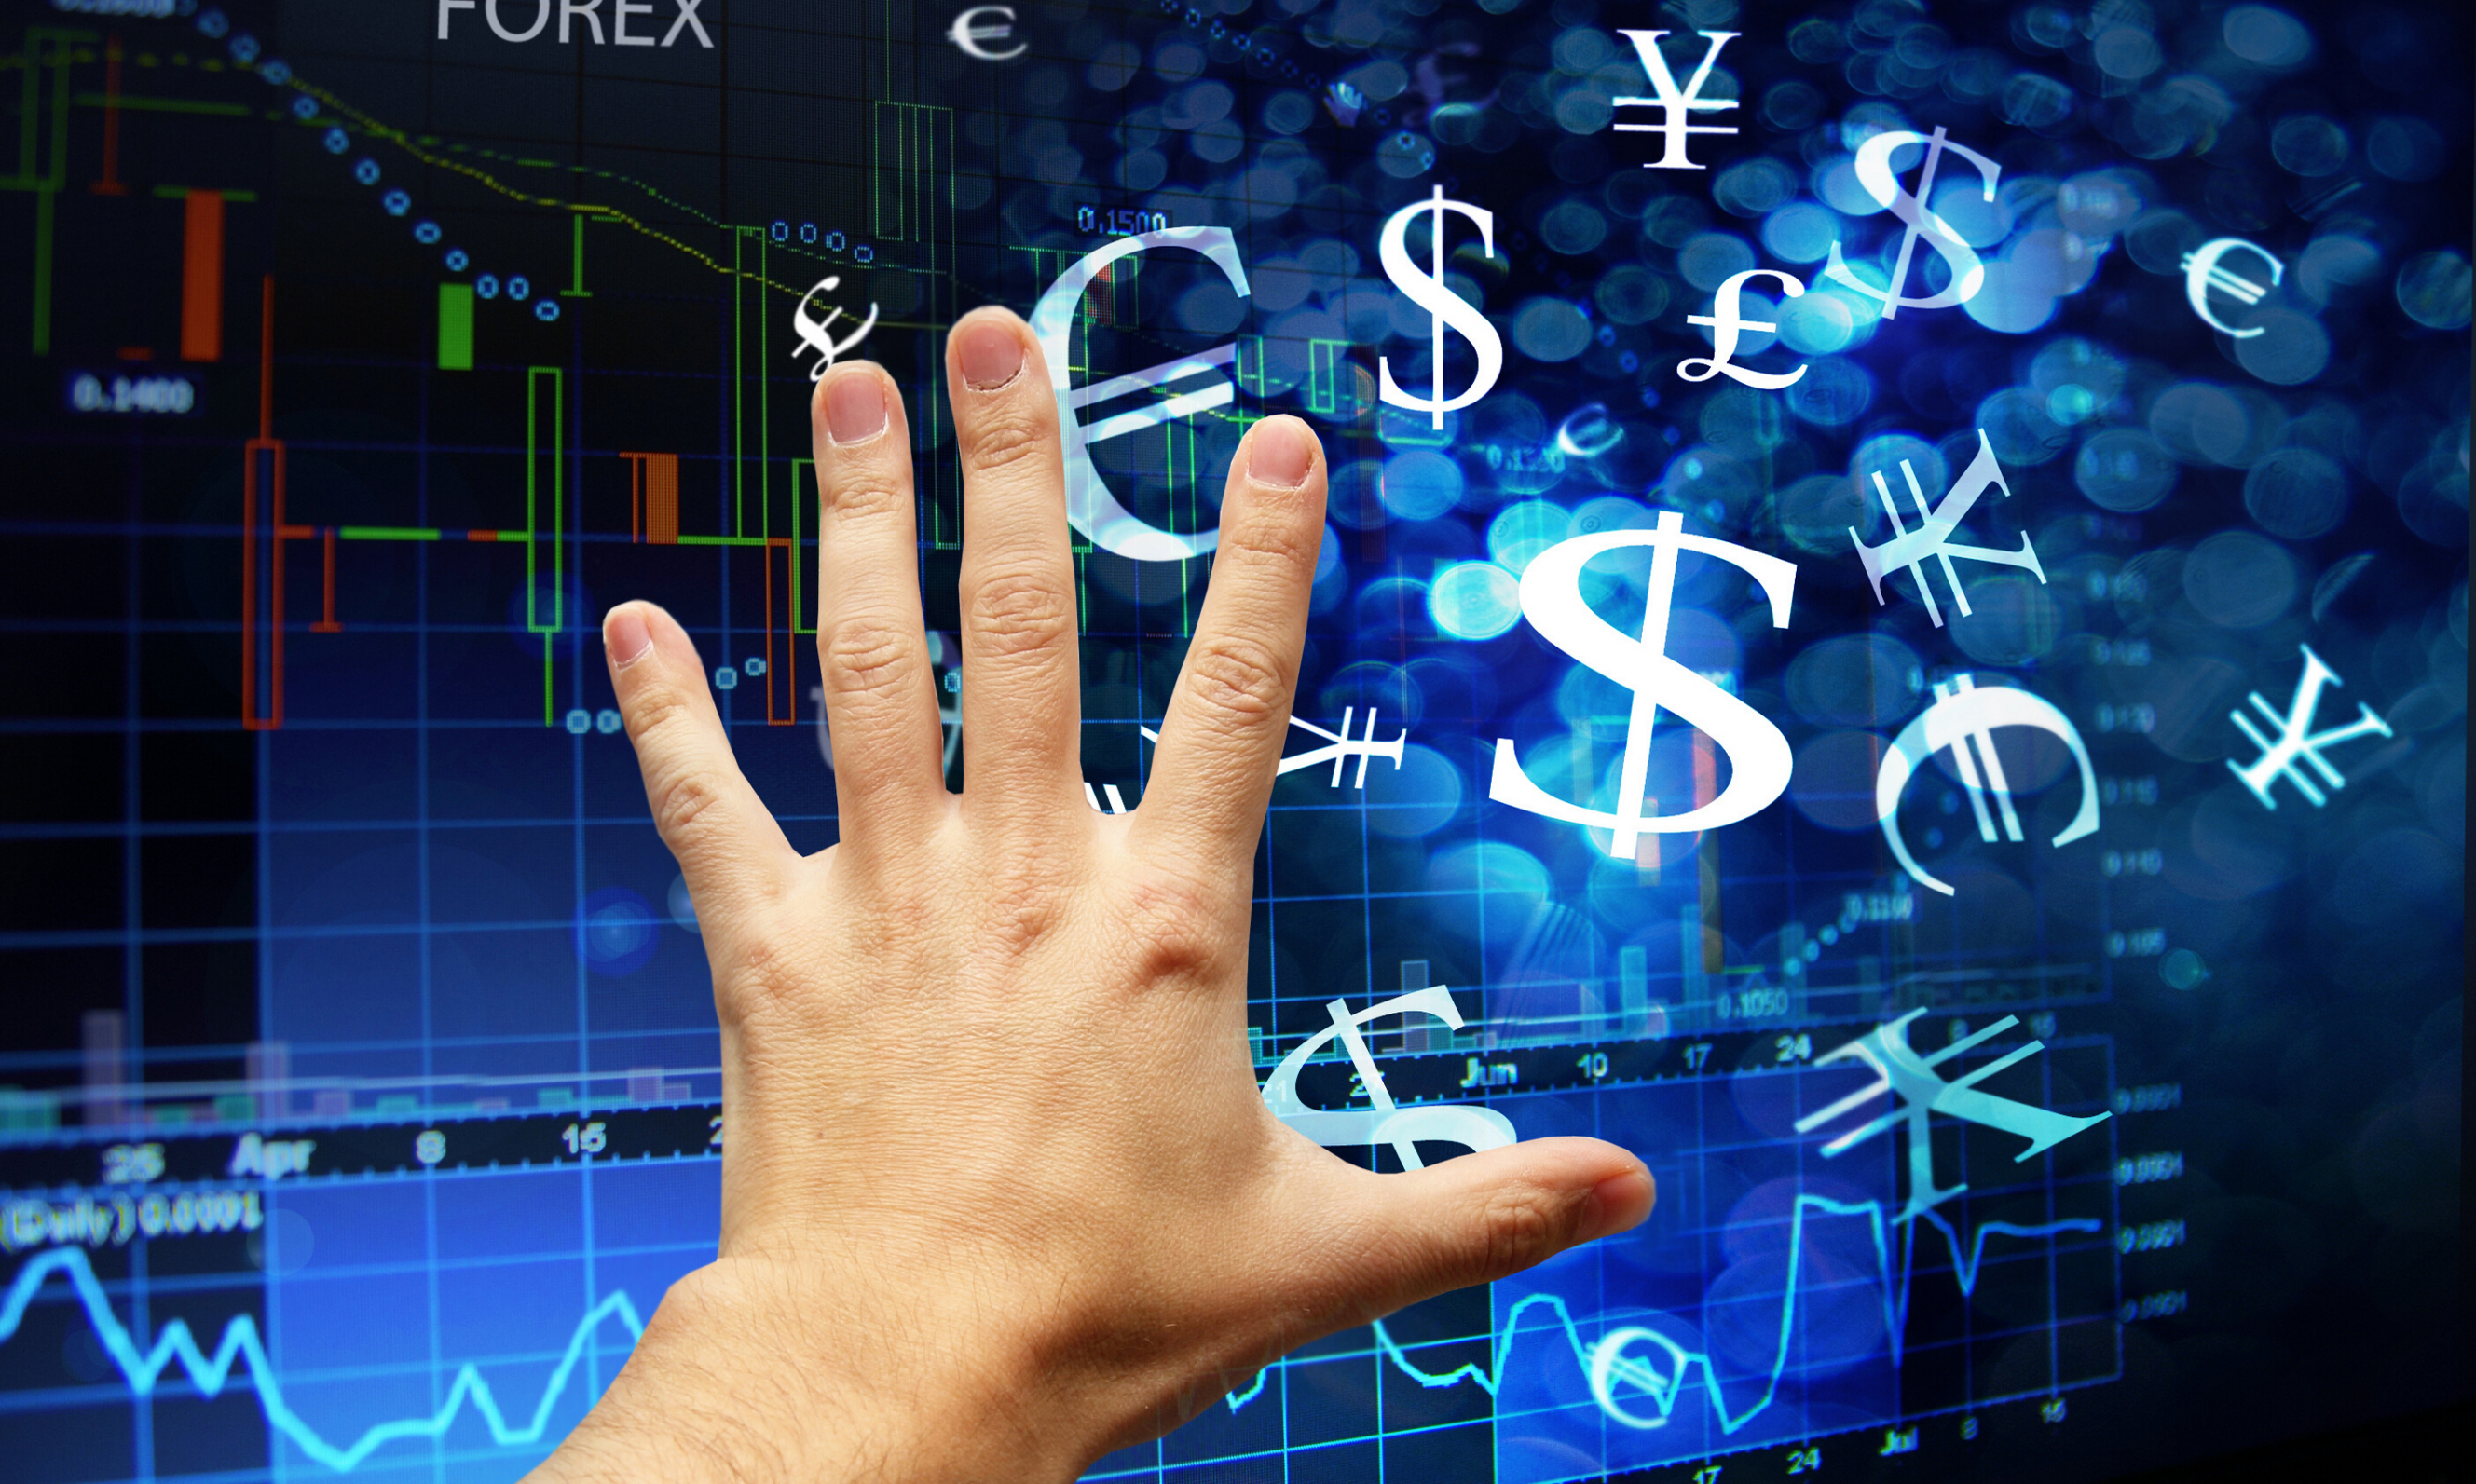 what affects forex trading?